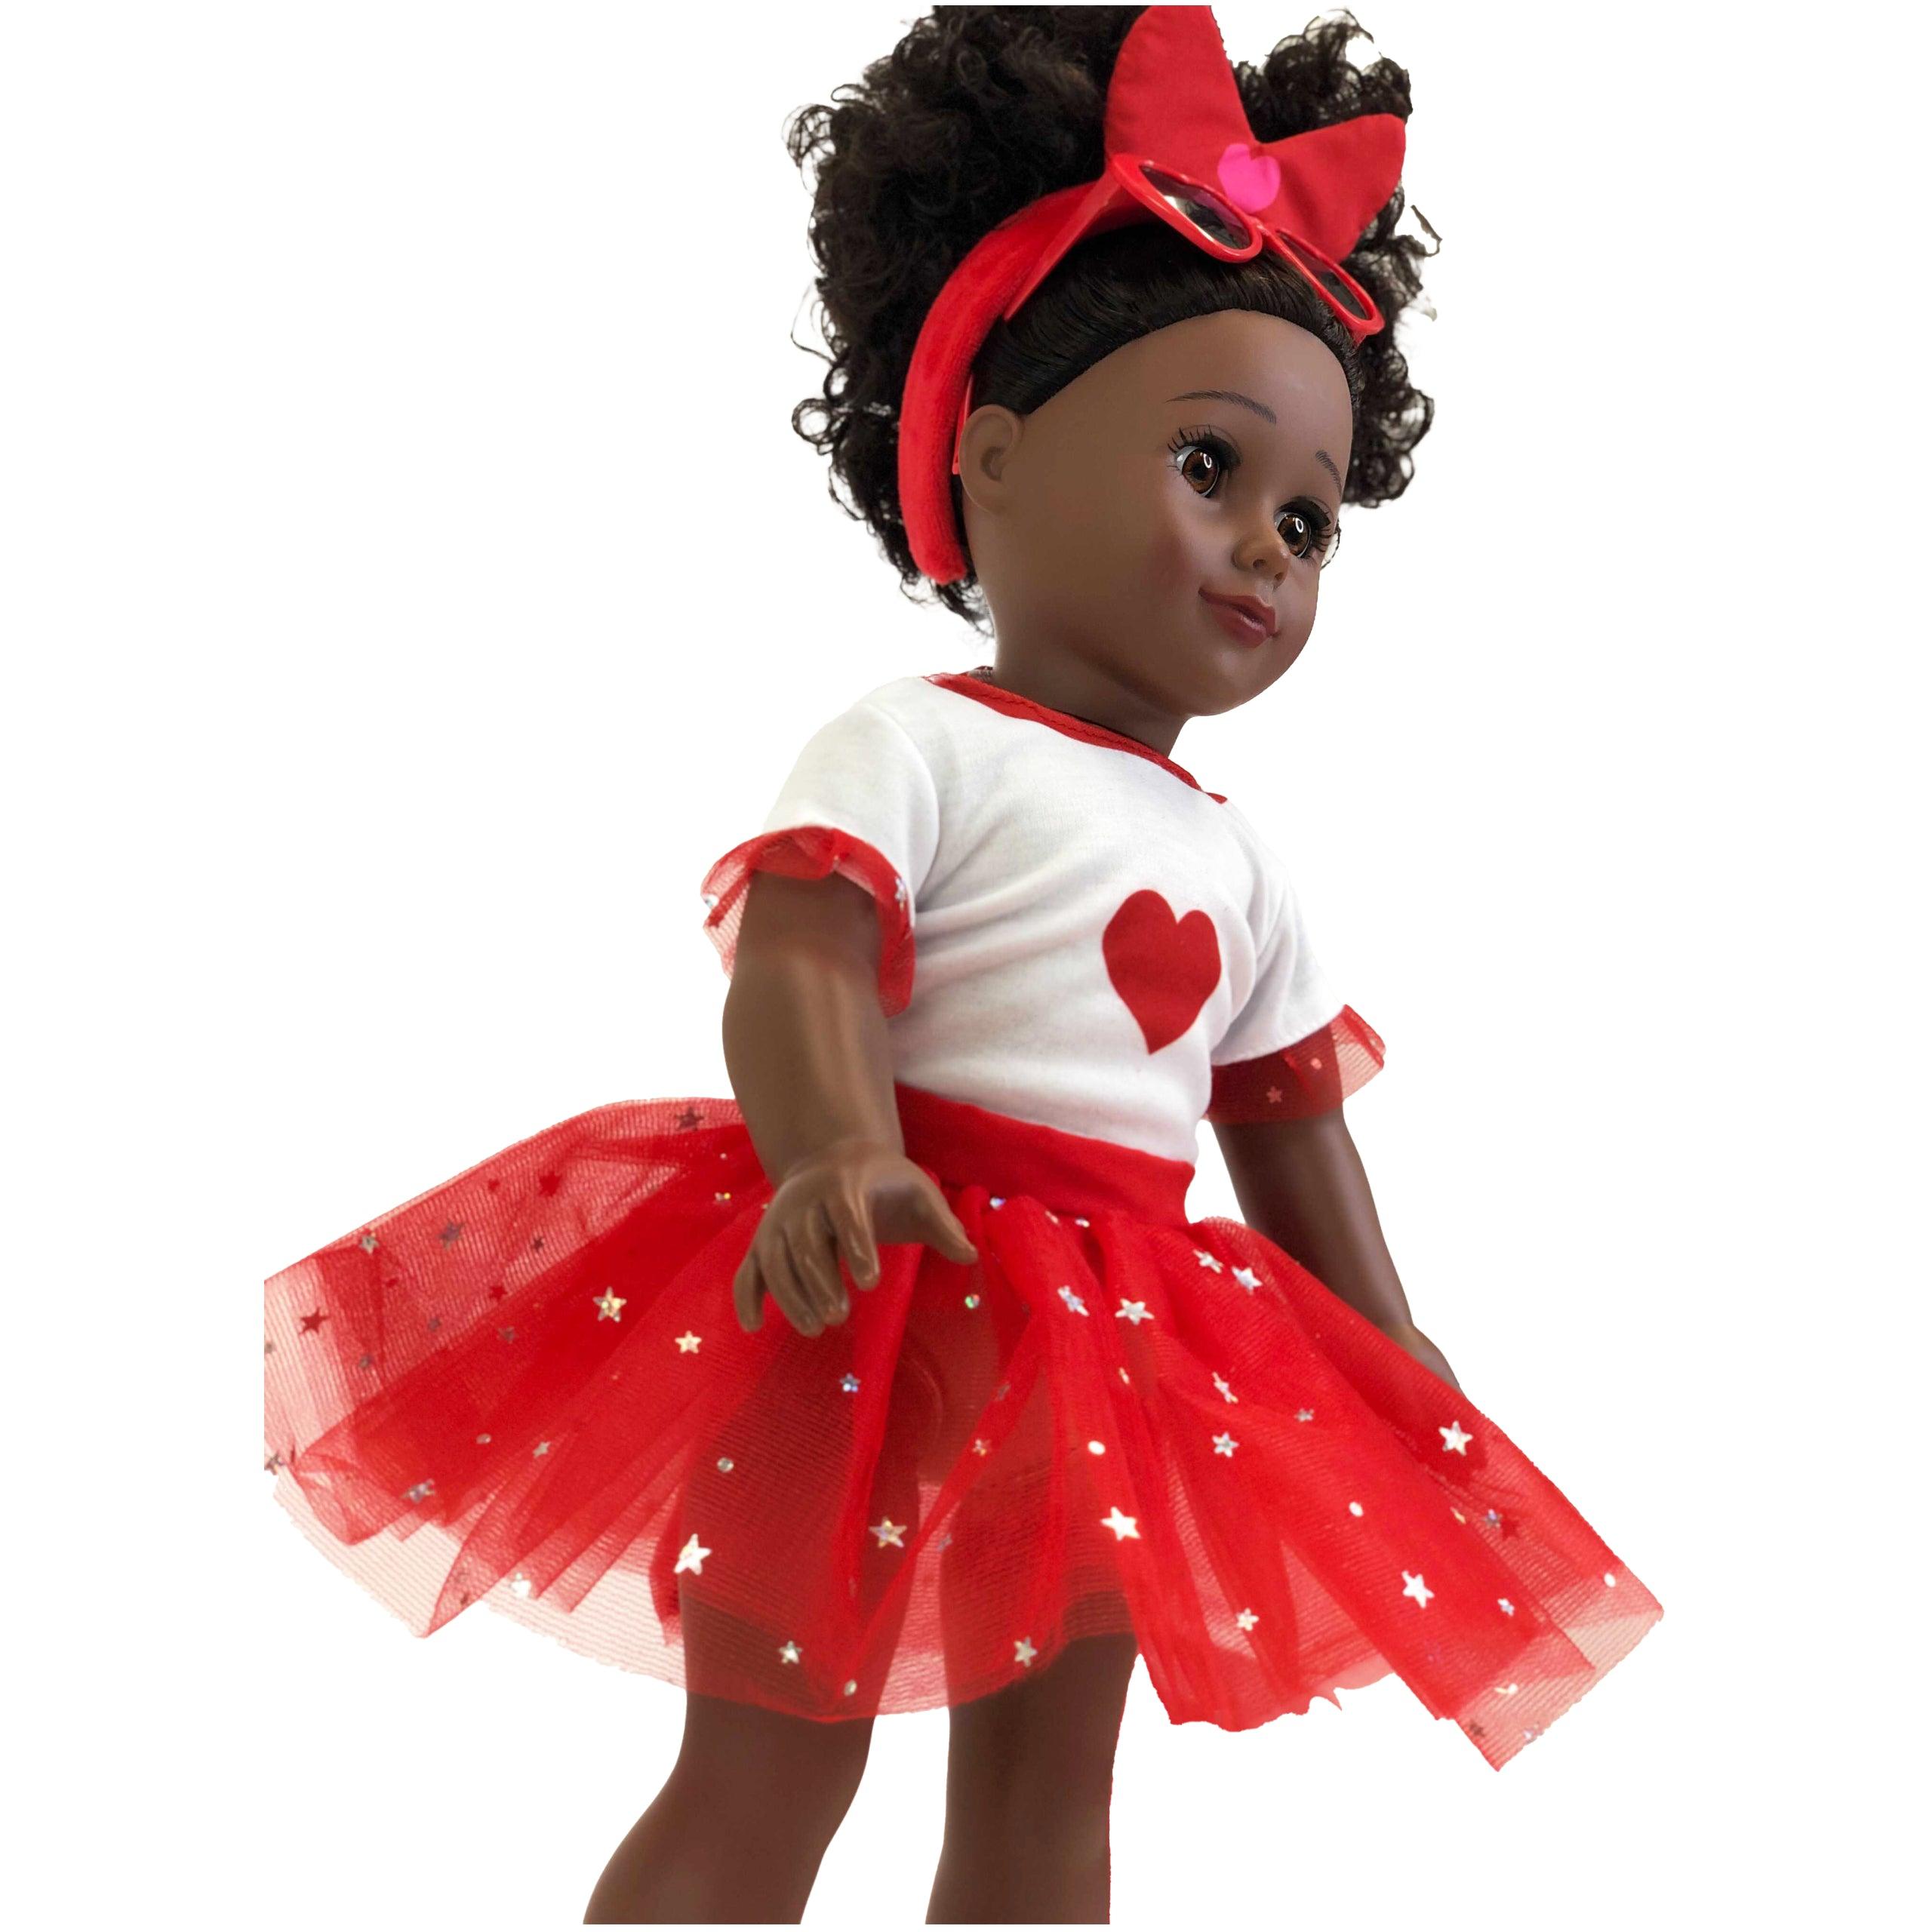 Playtime by Eimmie Playtime Pack Valentine's Day with Matching Child Accessories 18 Inch Dolls - OrangeOnions Wholesale